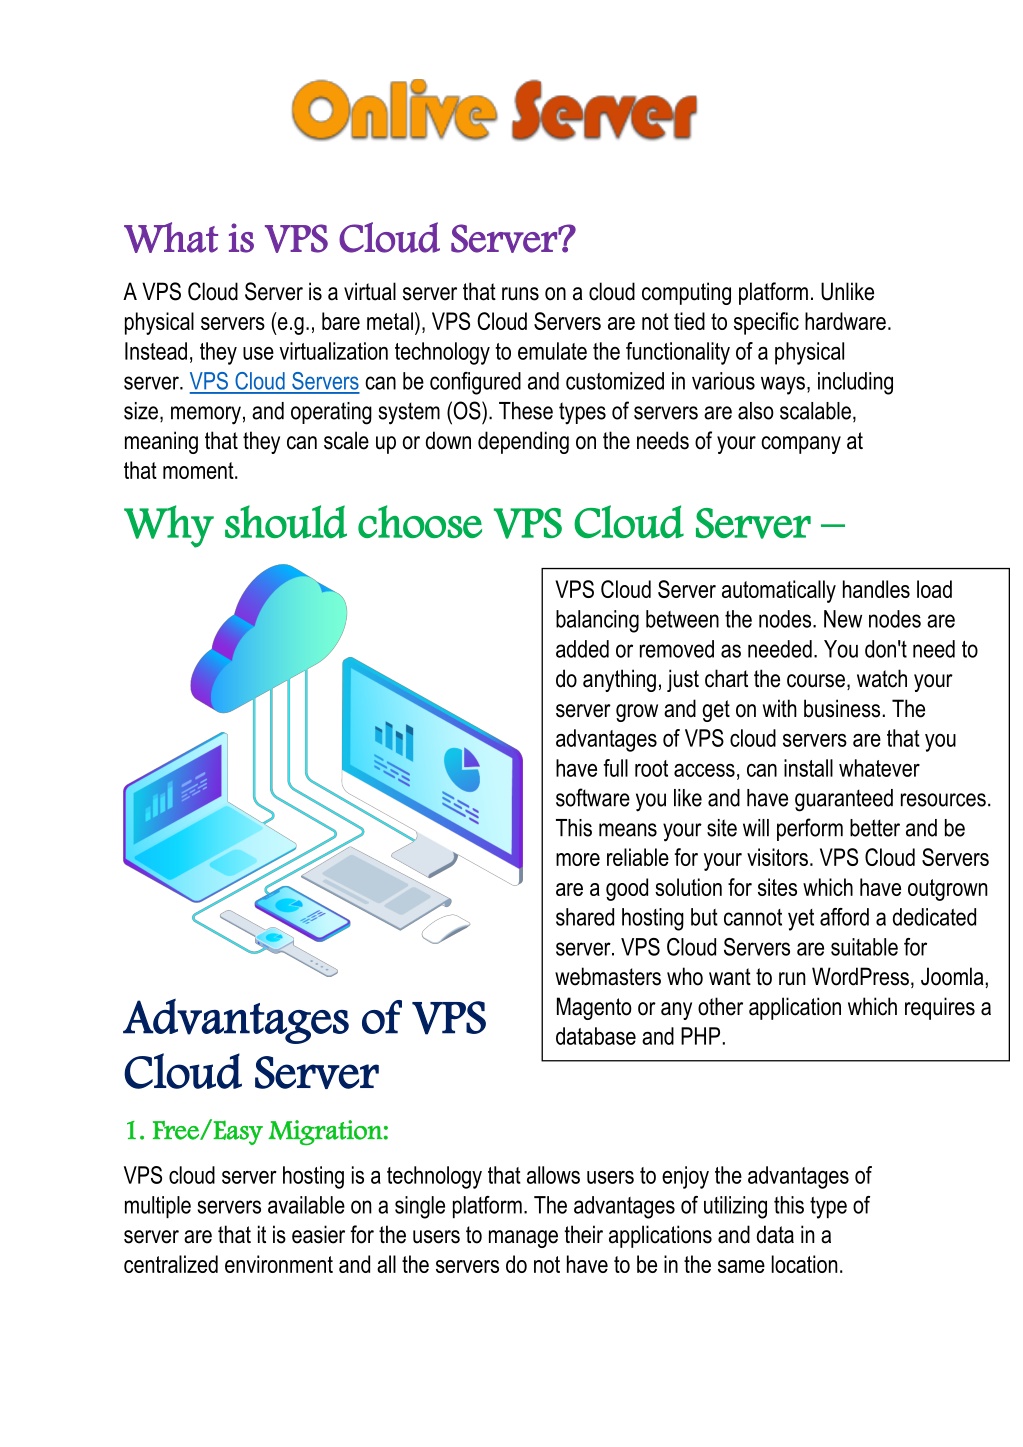 PPT - Buy VPS Cloud Server from Onlive Server PowerPoint ...